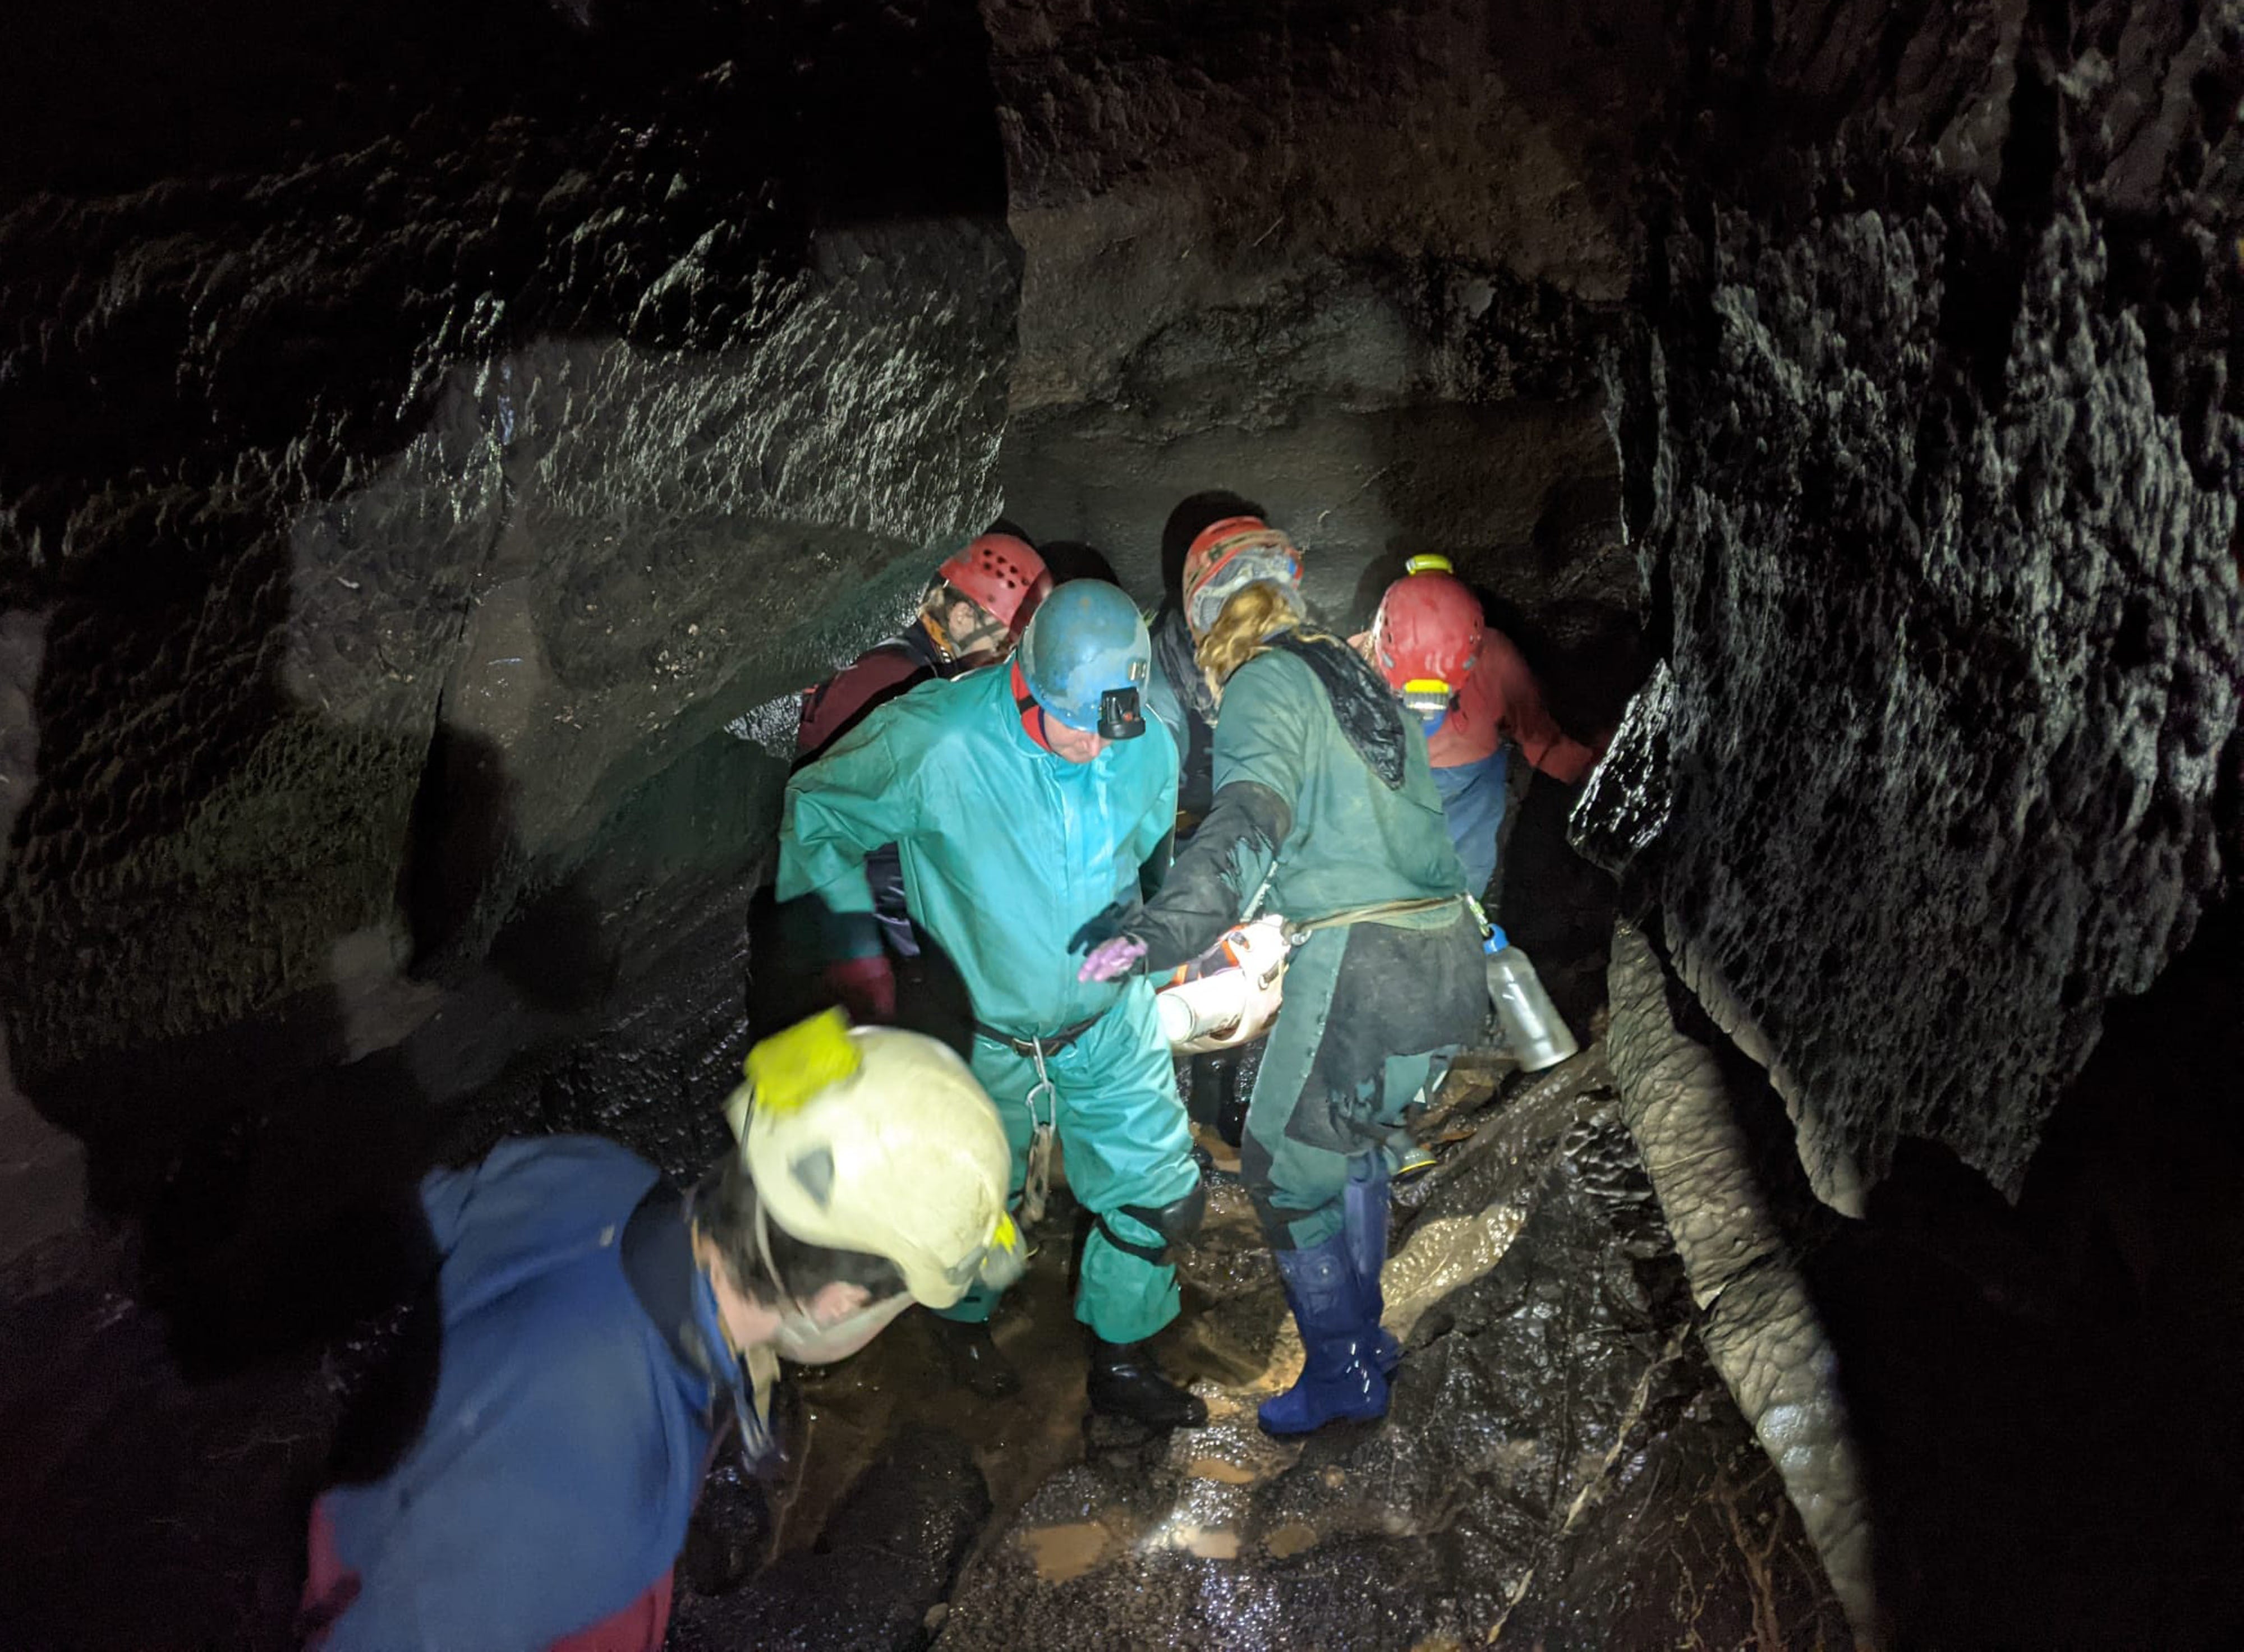 Around 300 rescuers took part in the mission to rescue the injured caver